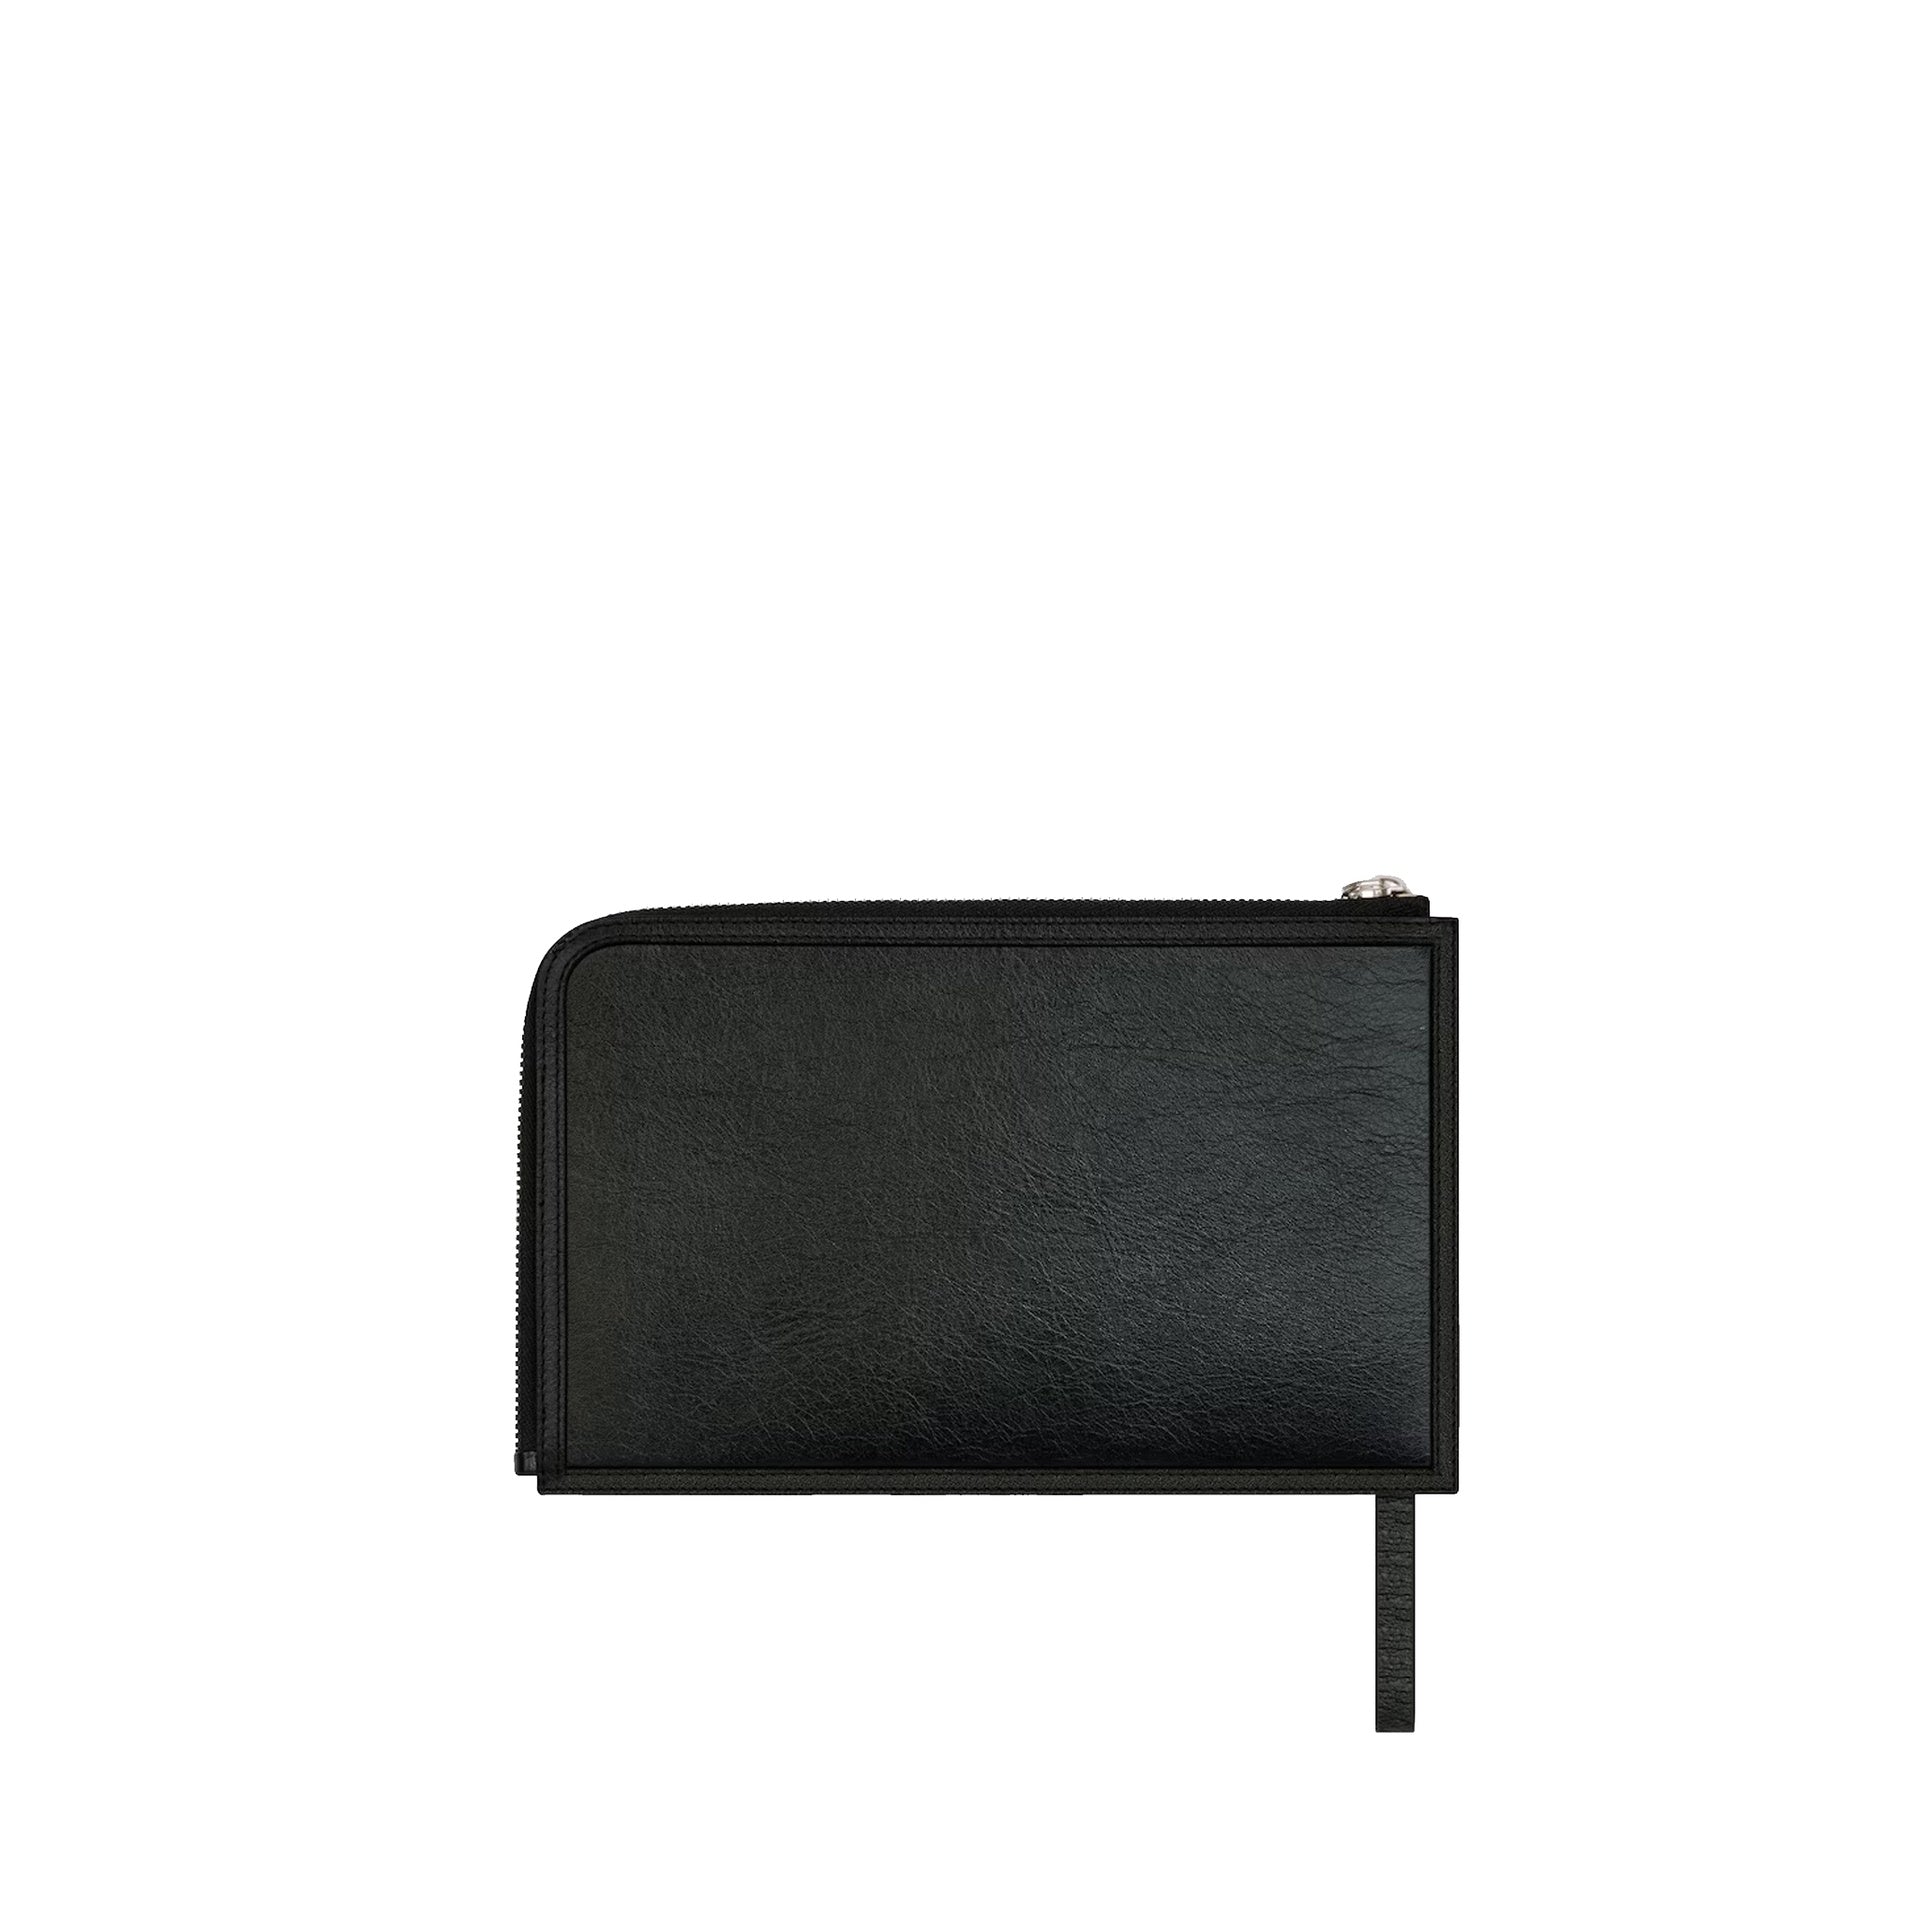 Givenchy Voyou Pouch Bag